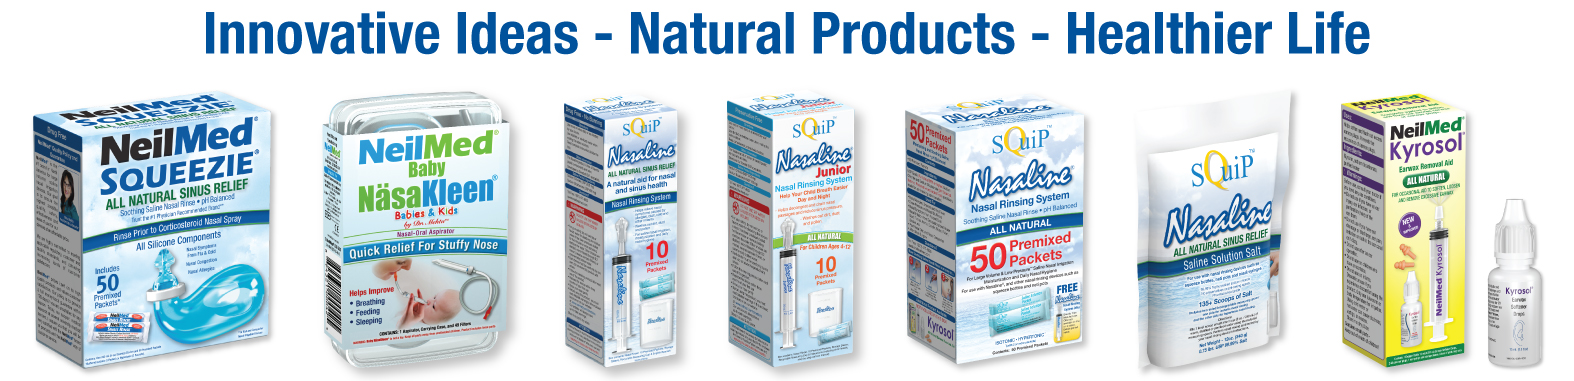 Free medical product samples